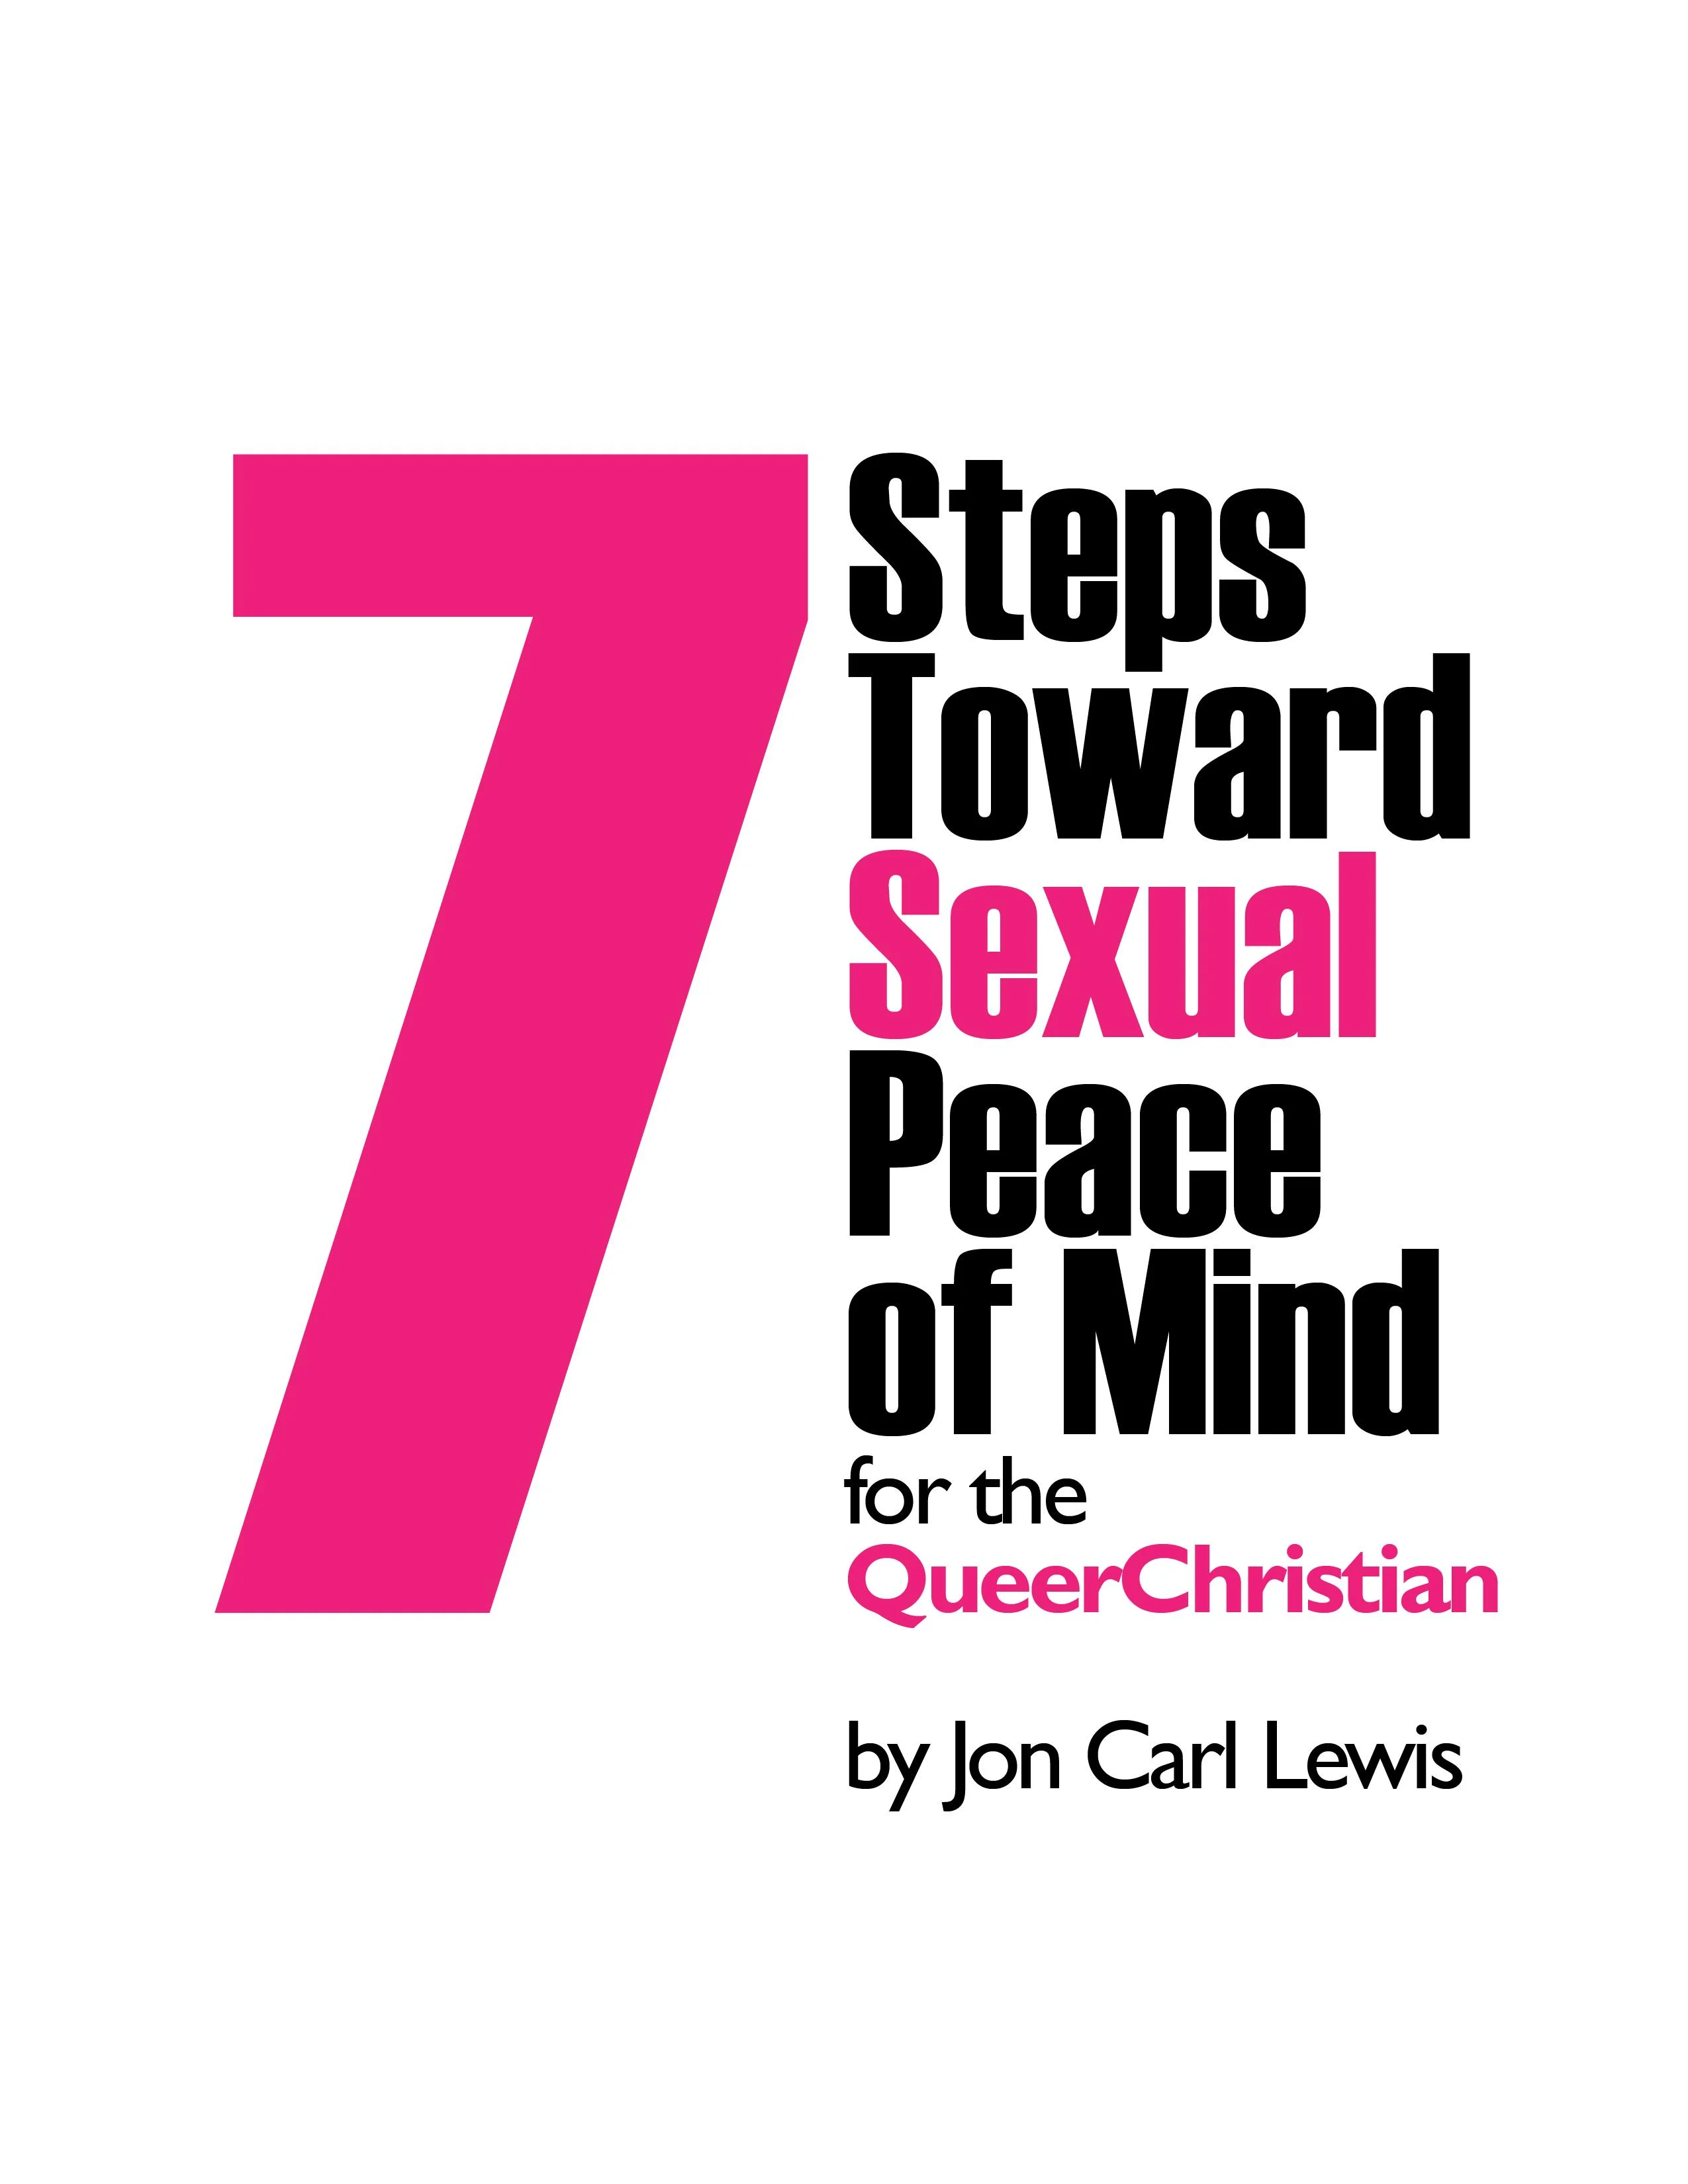 7 Steps Toward Sexual Peace of Mind (for the Queer Christian) thumbnail